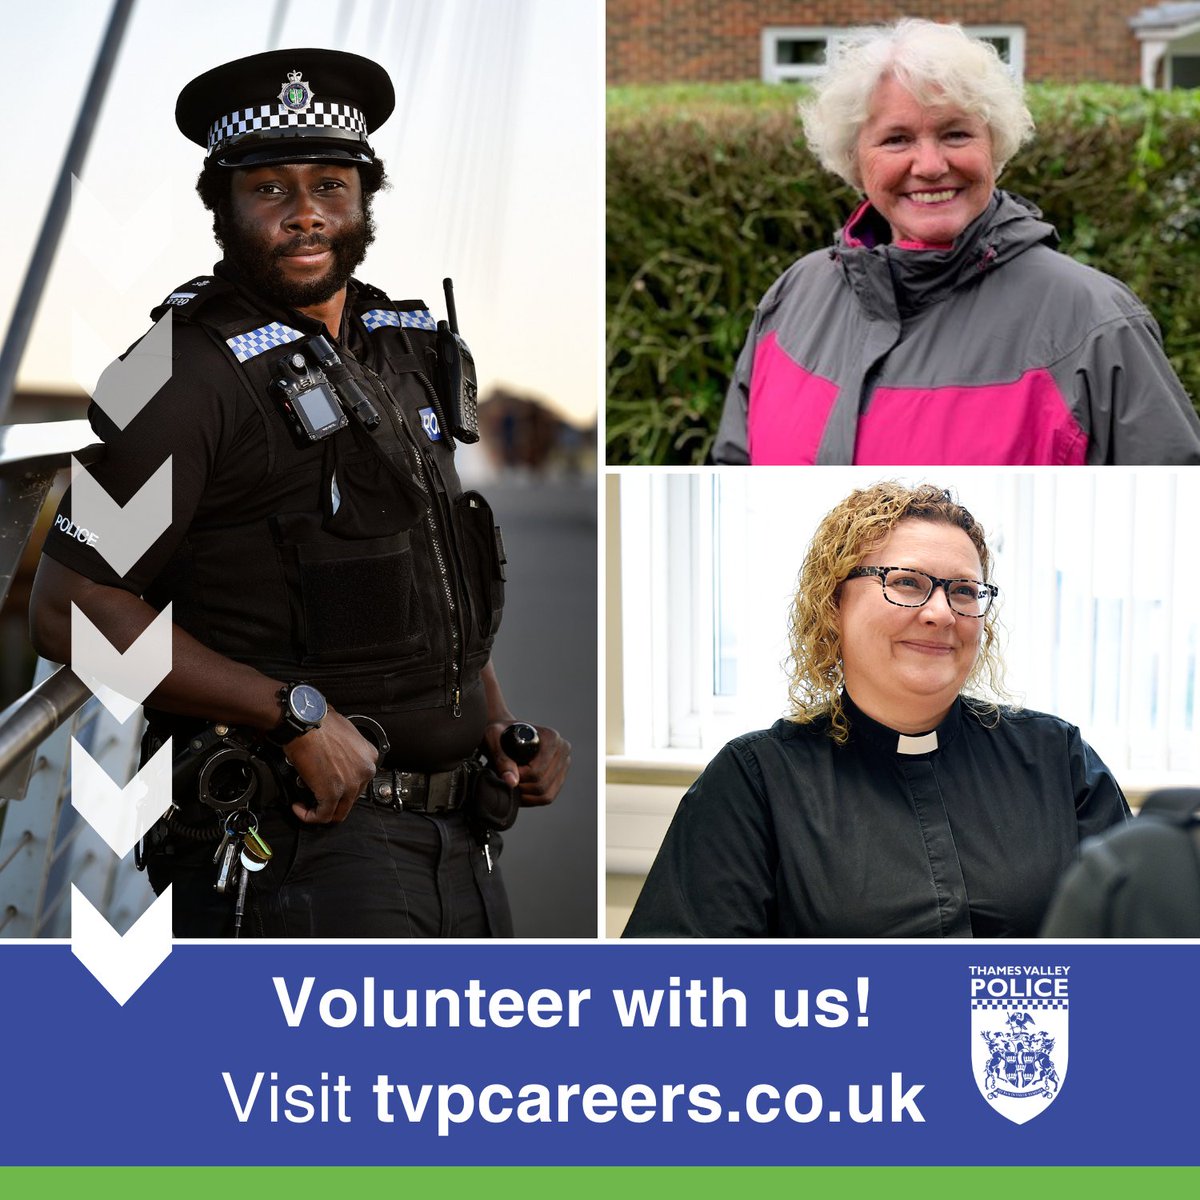 If you would like to make a difference in your local community, consider volunteering some of your spare time at Thames Valley Police.

For more information and to see all of our current volunteering opportunities visit  👉 
 orlo.uk/Lkrdm

#NationalVolunteersWeek